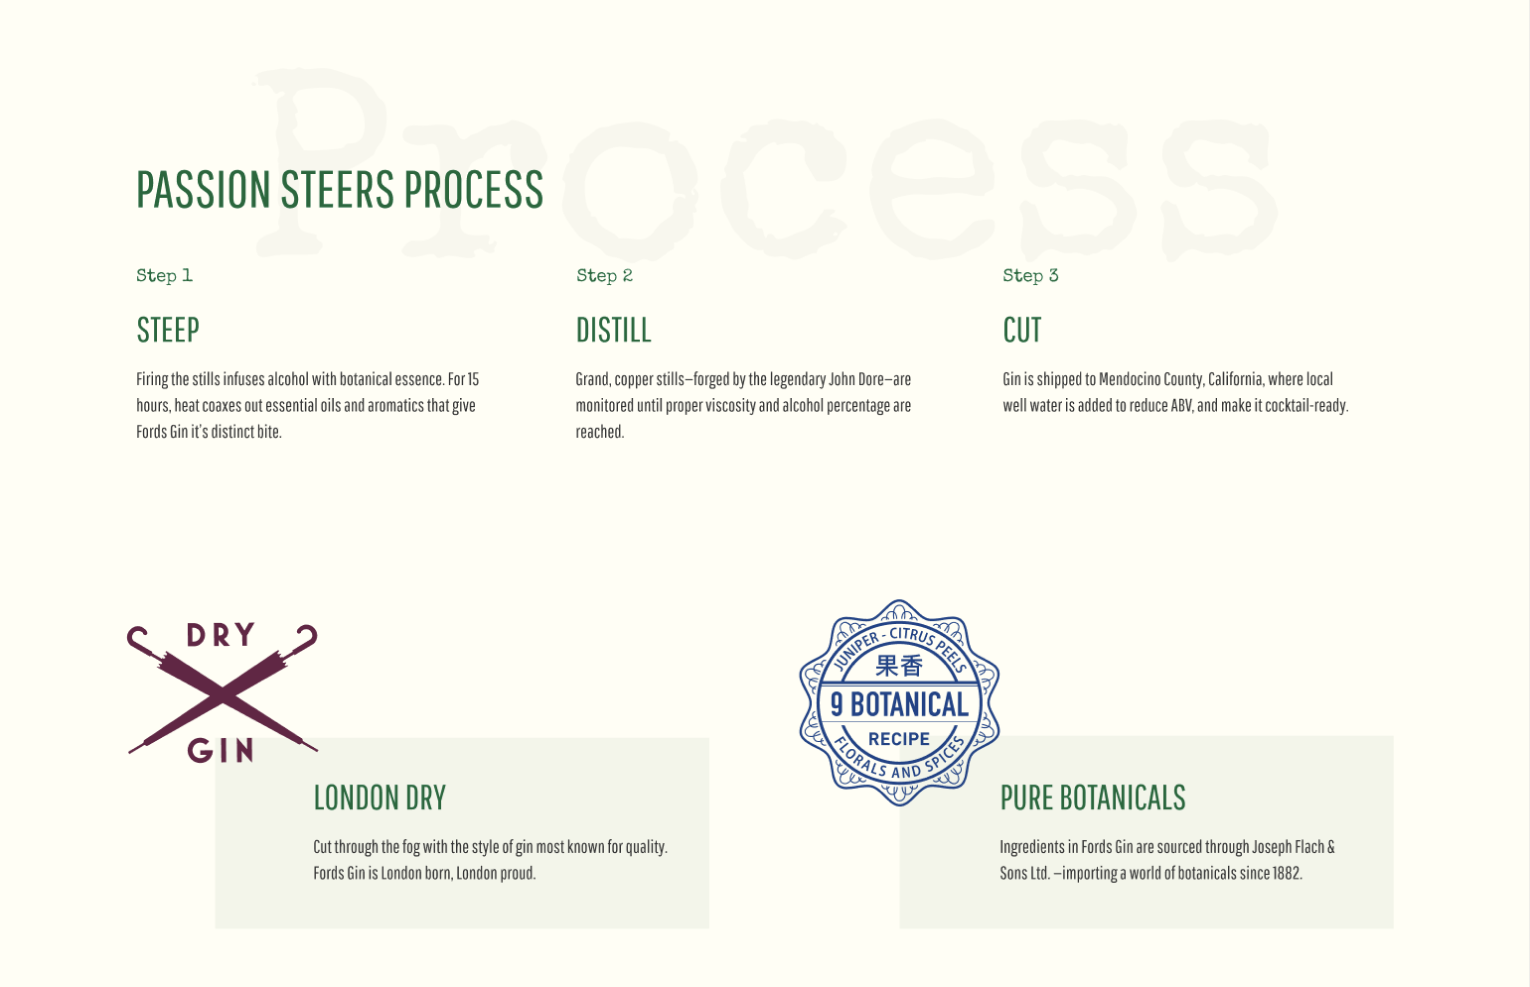 Fords Gin web design showing the process of making Fords Gin described in three steps.